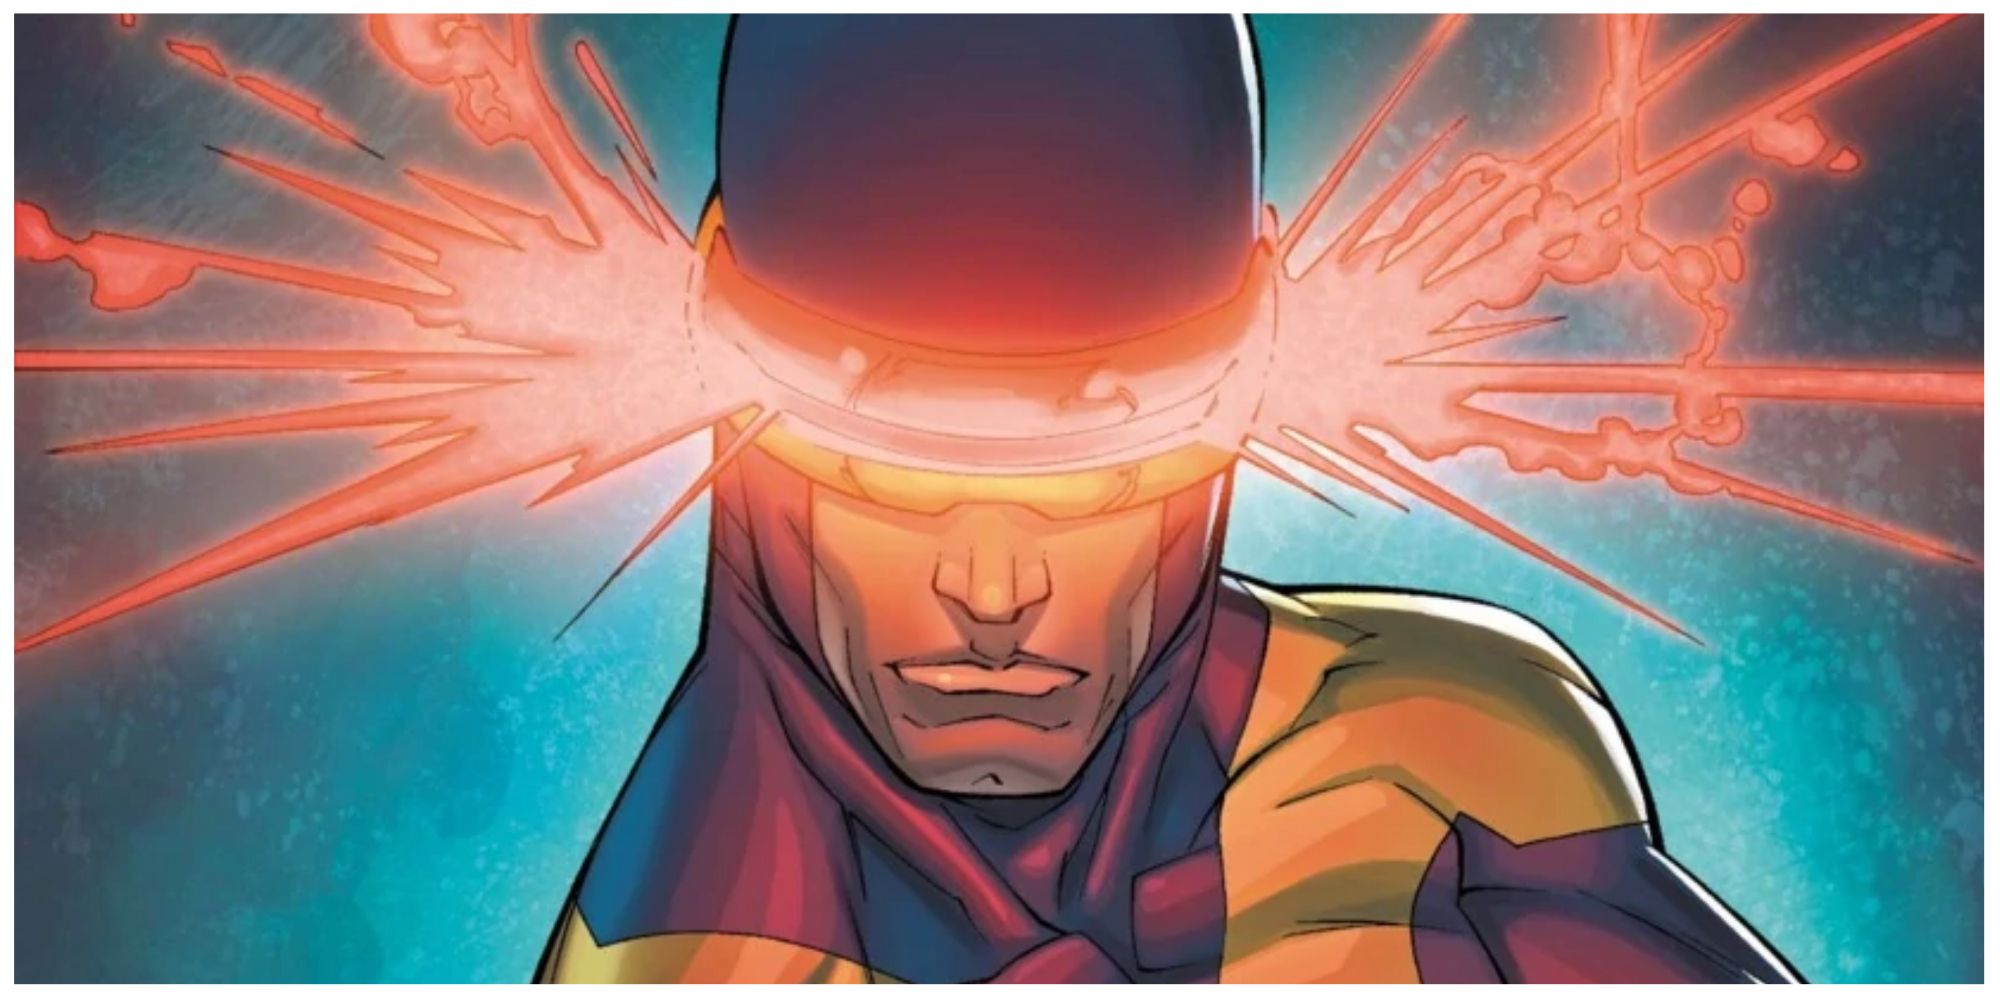 Comic art depicting Marvel Comics' Cyclops about to shoot lasers from his visor